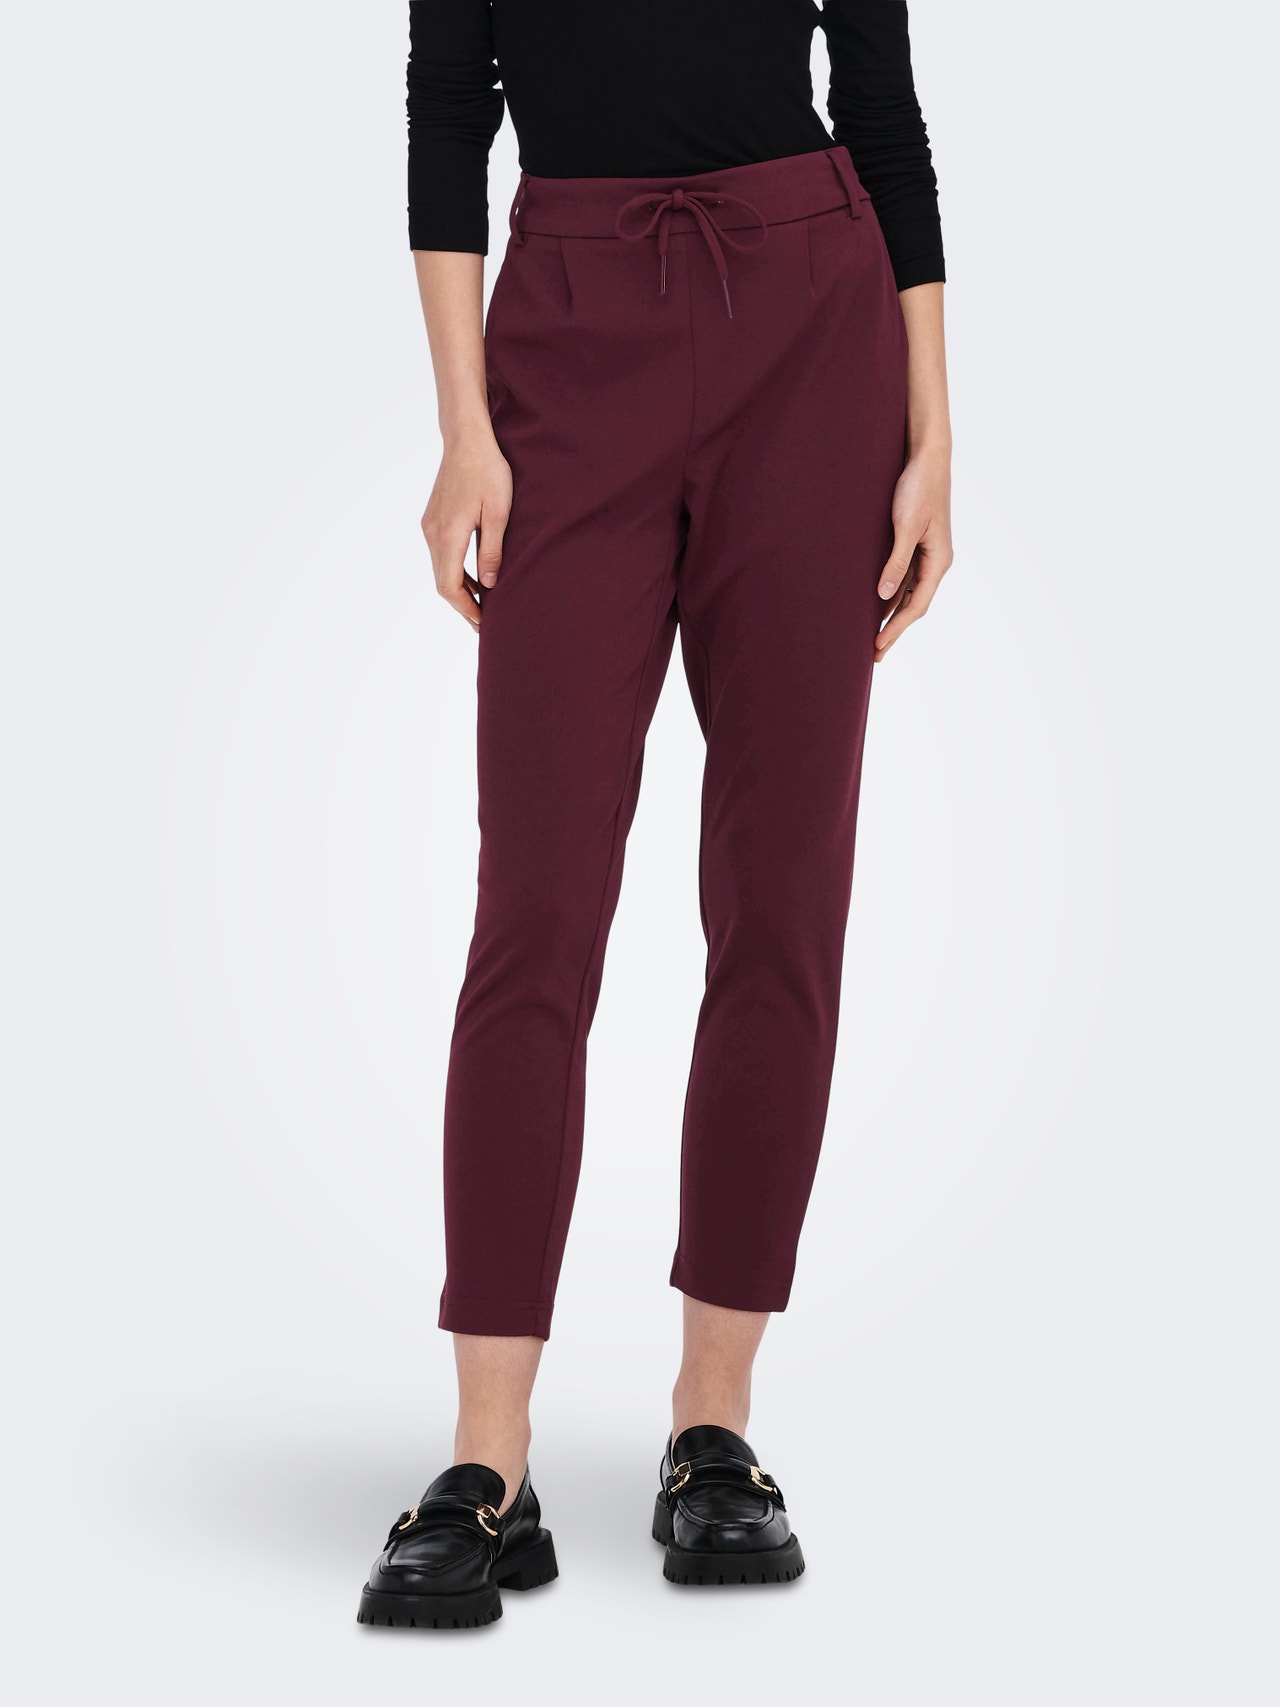 ONLY Poptrash Trousers -Windsor Wine - 15264162